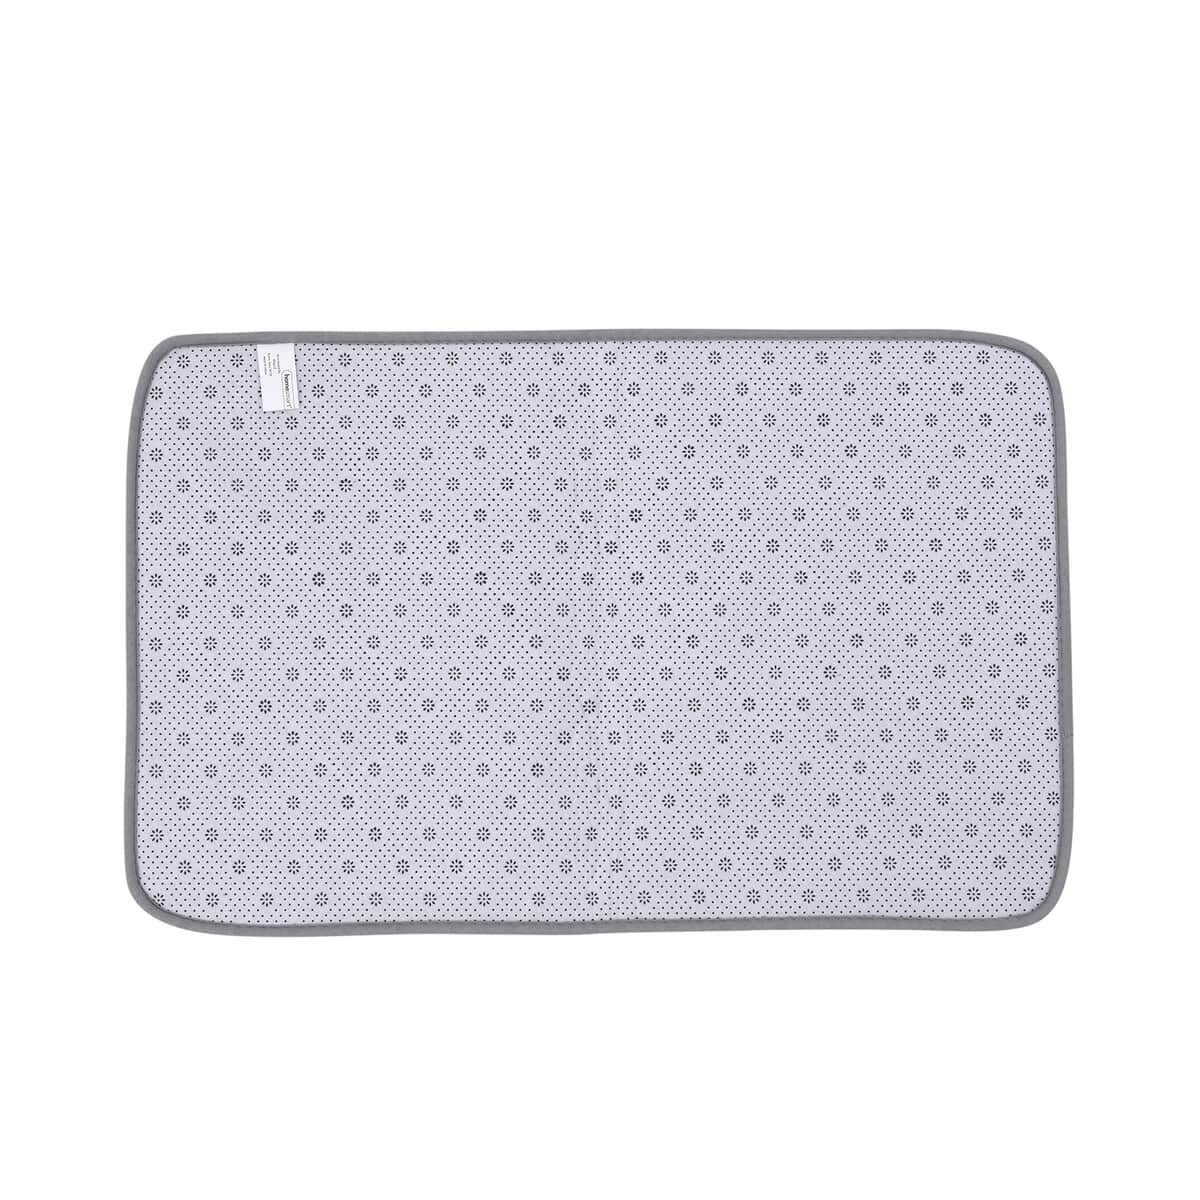 Gray Embossed Flannel Rectangular Bathmat and Contour Toilet Mat image number 4